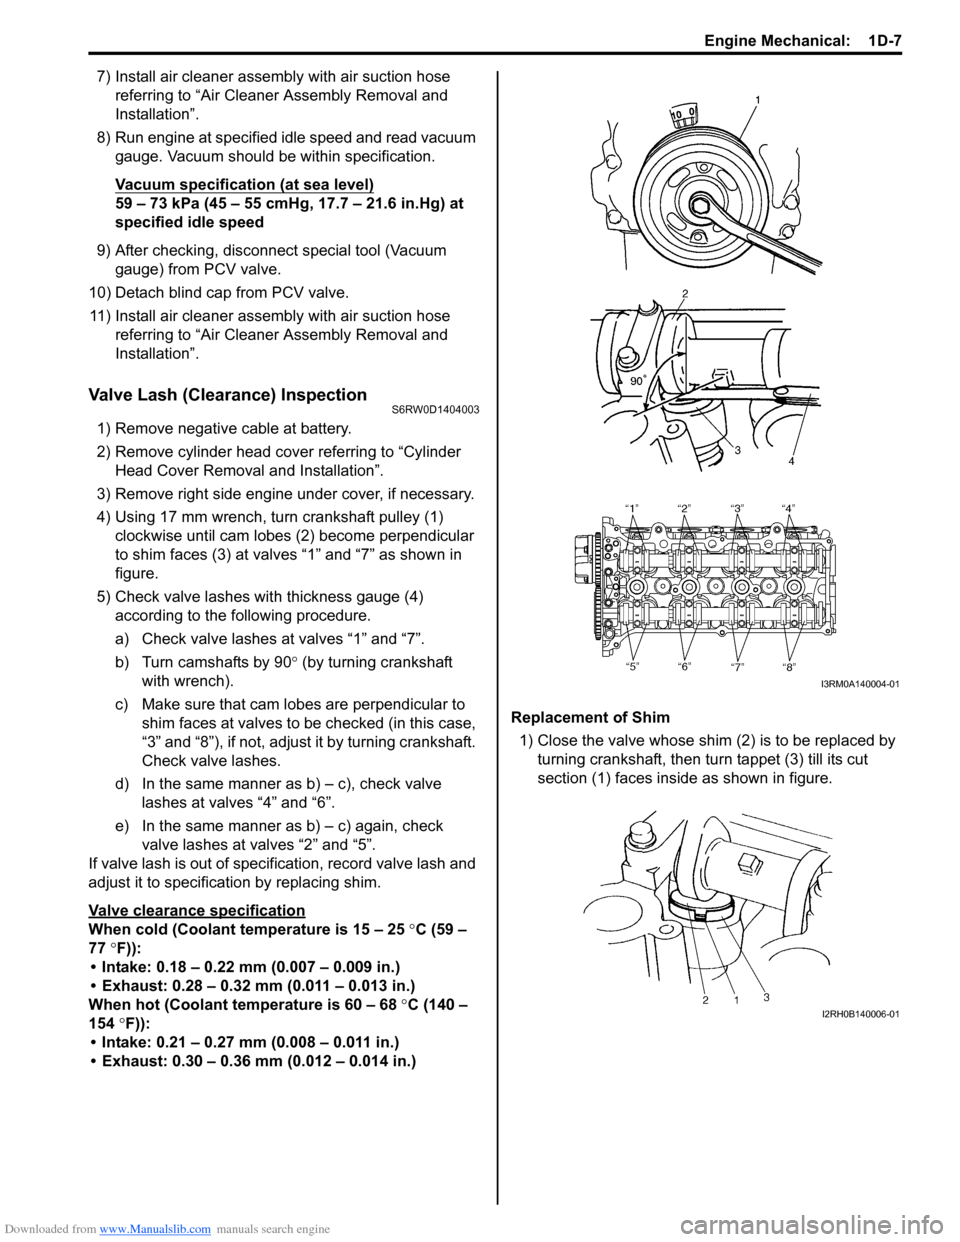 SUZUKI SX4 2006 1.G Service Workshop Manual Downloaded from www.Manualslib.com manuals search engine Engine Mechanical:  1D-7
7) Install air cleaner assembly with air suction hose 
referring to “Air Cleaner Assembly Removal and 
Installation�